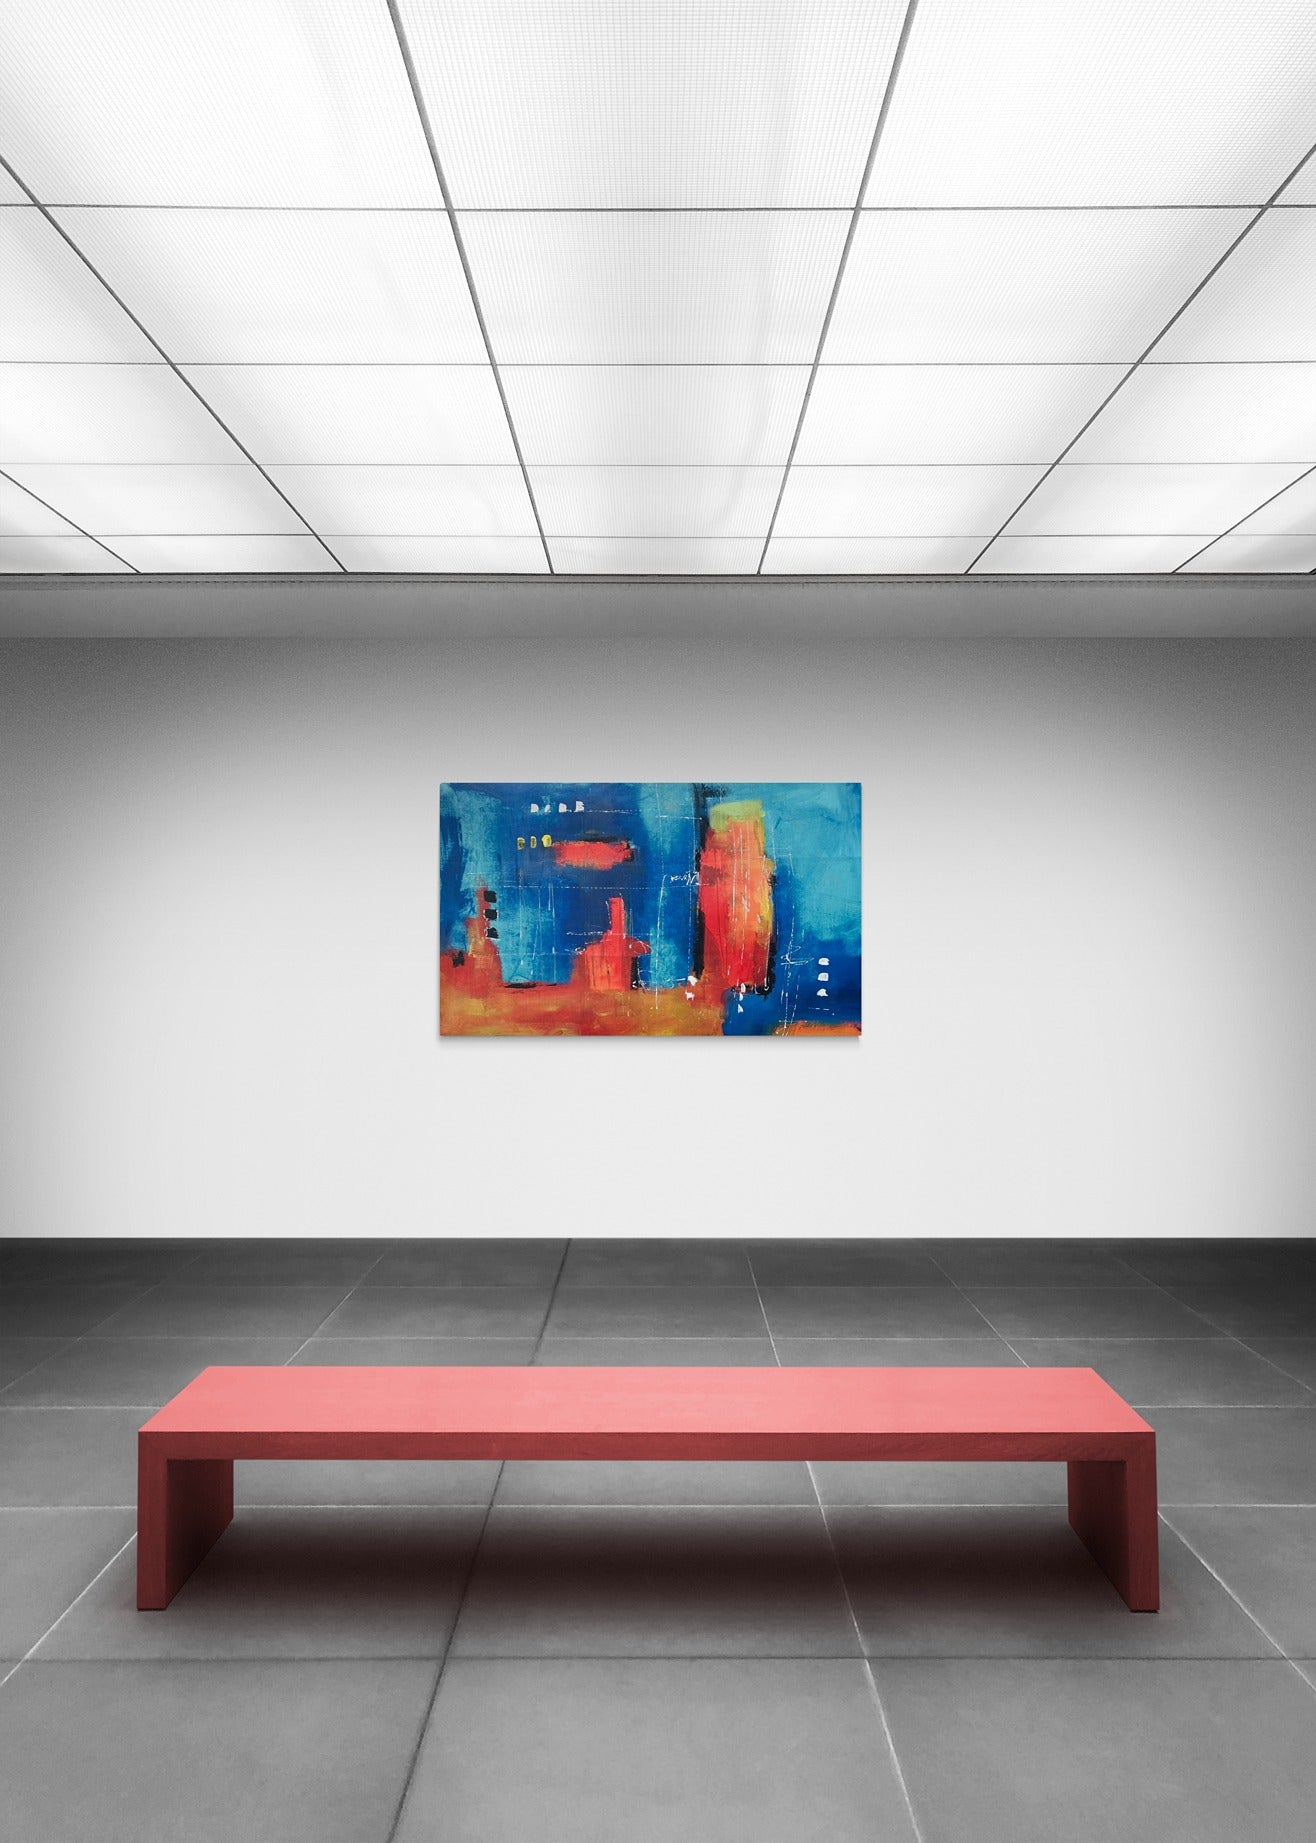 Bright blue canvas wall art brightens the gallery, perfectly complementing the colorful bench seat and adding vibrancy to the space.